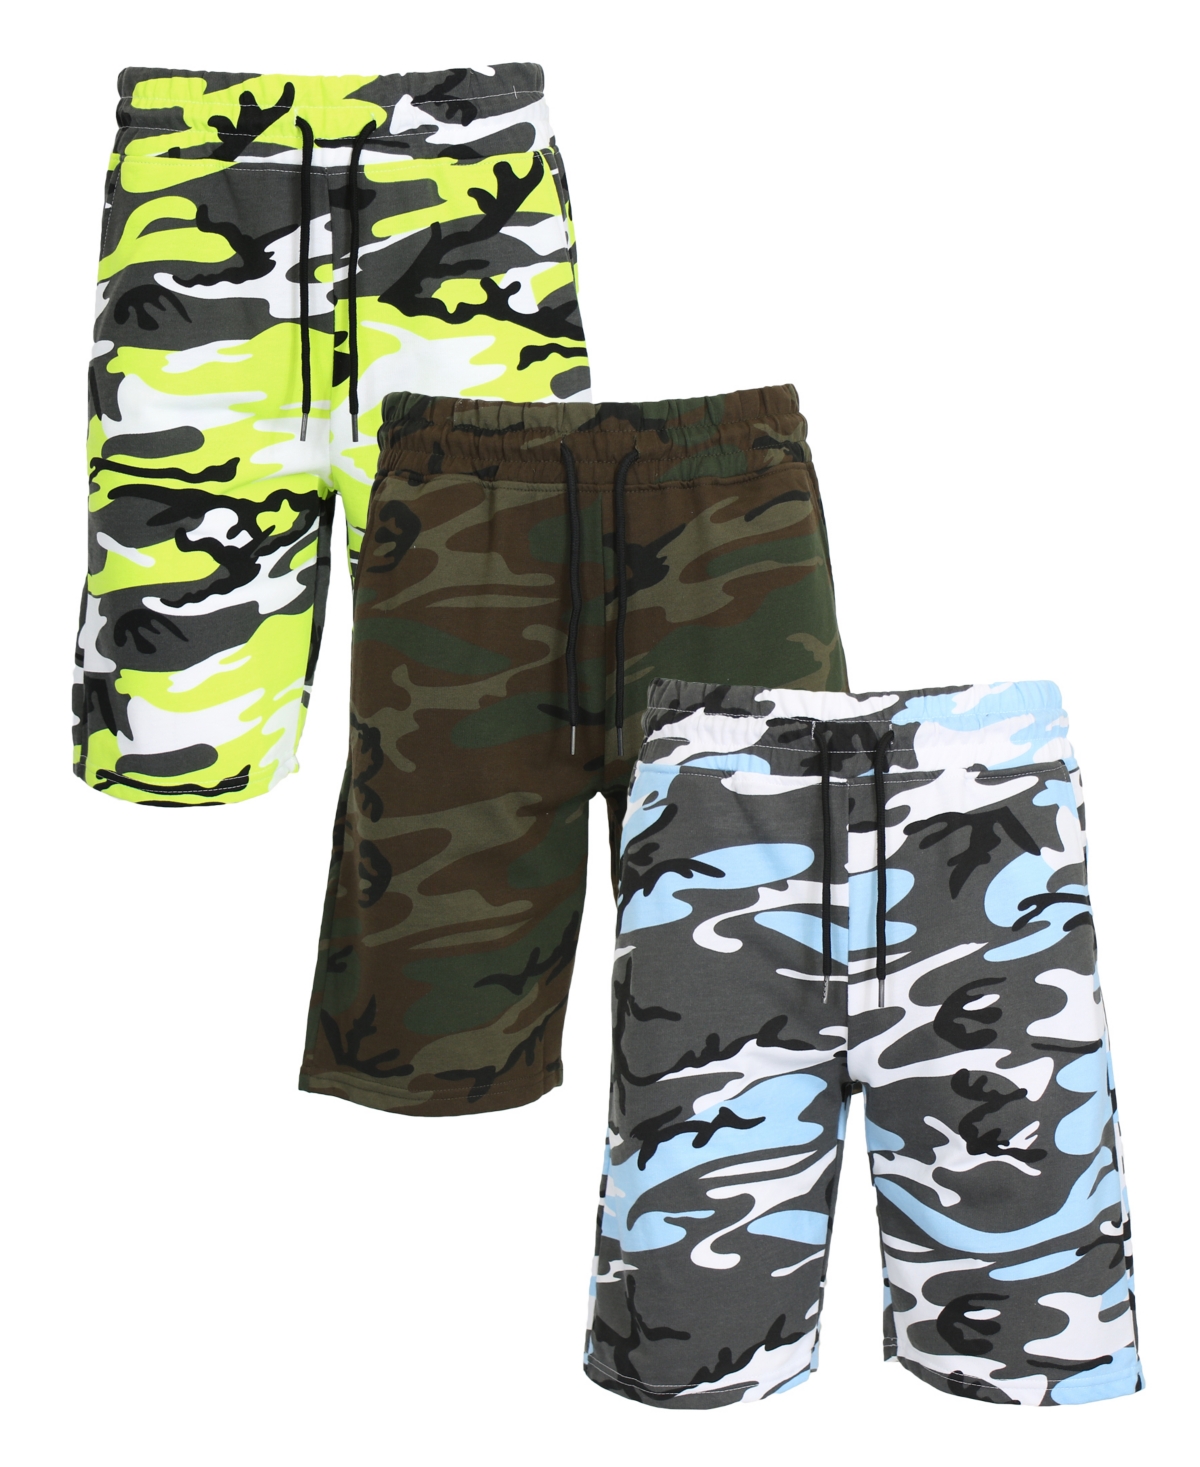 Galaxy By Harvic Men's Camo Printed French Terry Shorts, Pack Of 3 In Neon Green Camo-woodland Camo-light Blue